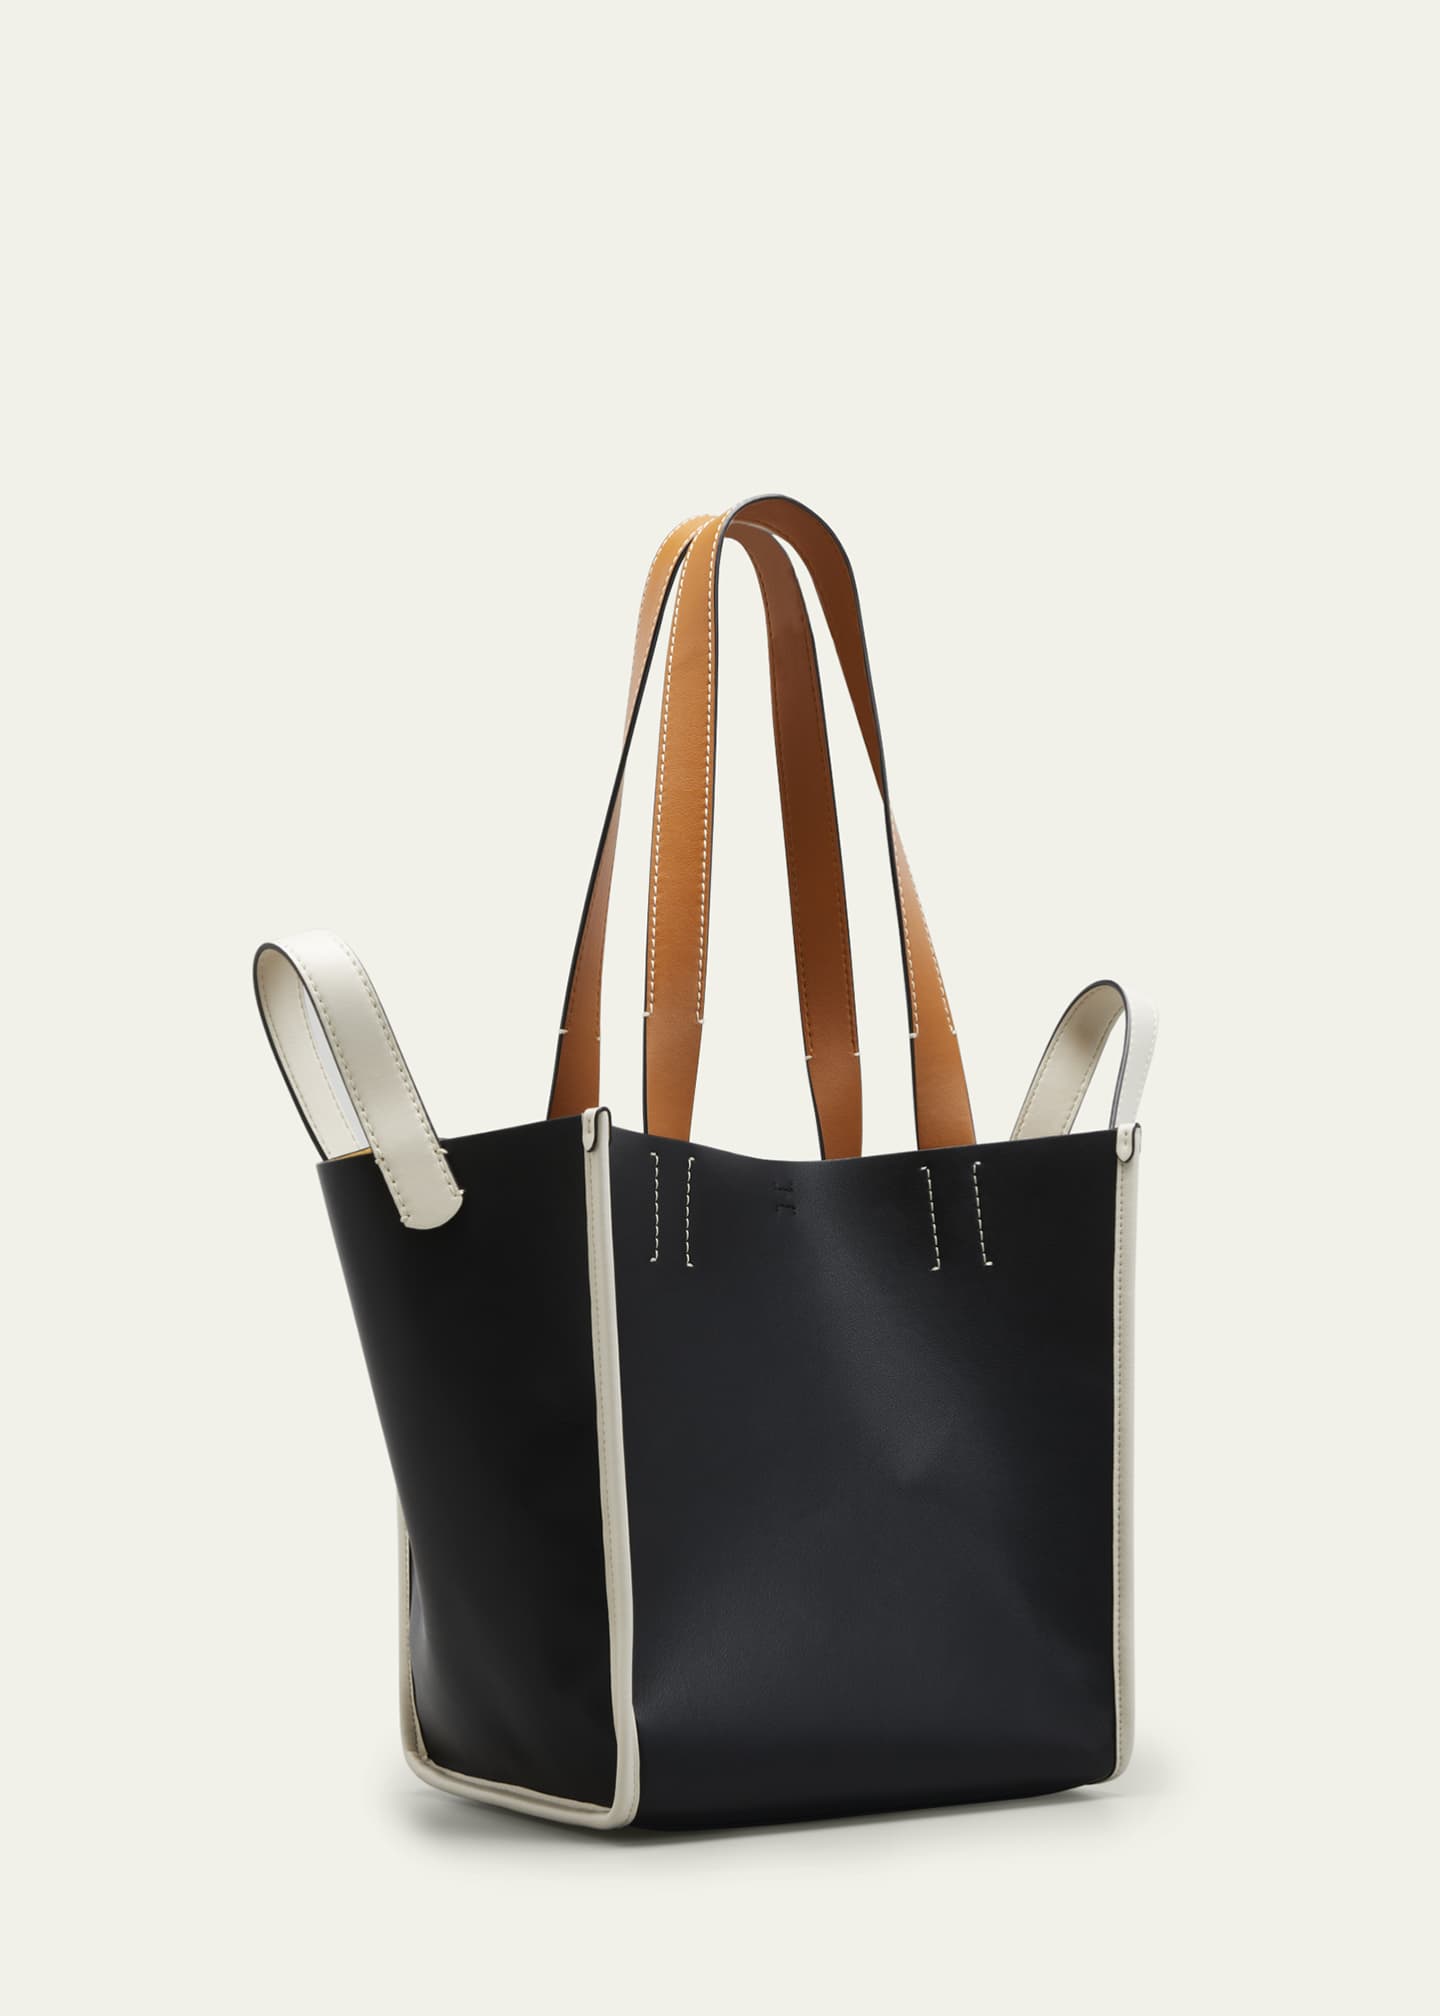 Proenza Schouler White Label Mercer Large Colorblock Leather Tote Bag ...